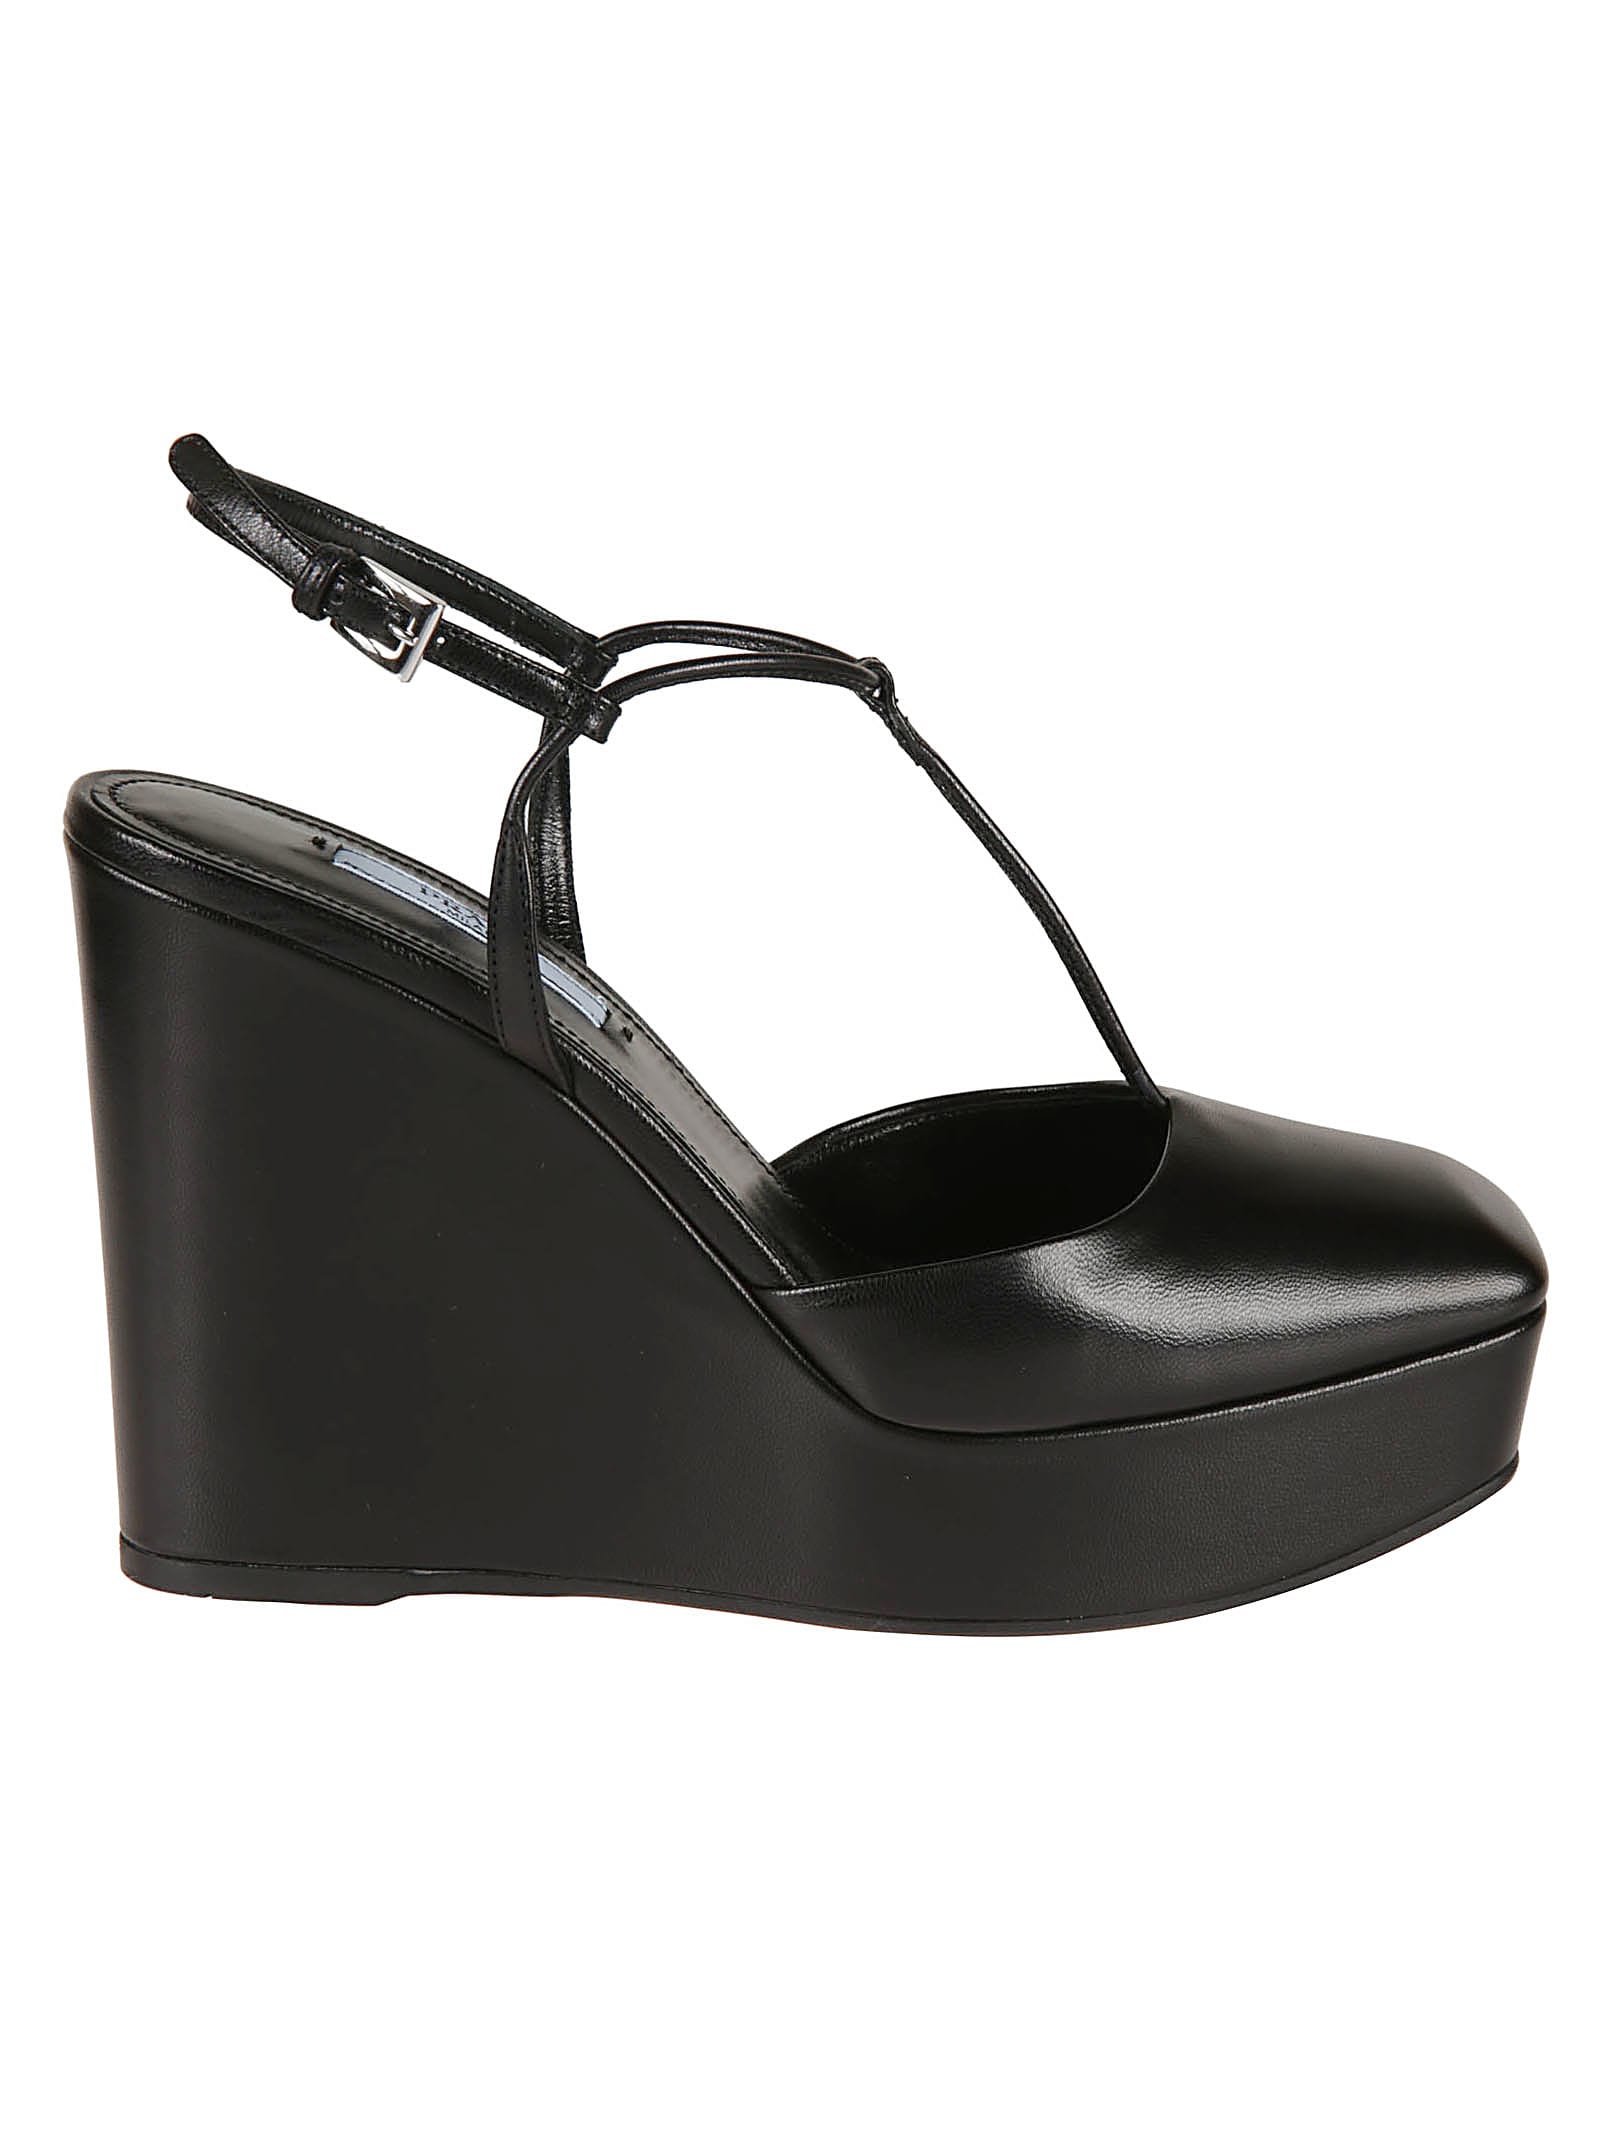 Buy Prada Classic Wedge Sandals online, shop Prada shoes with free shipping